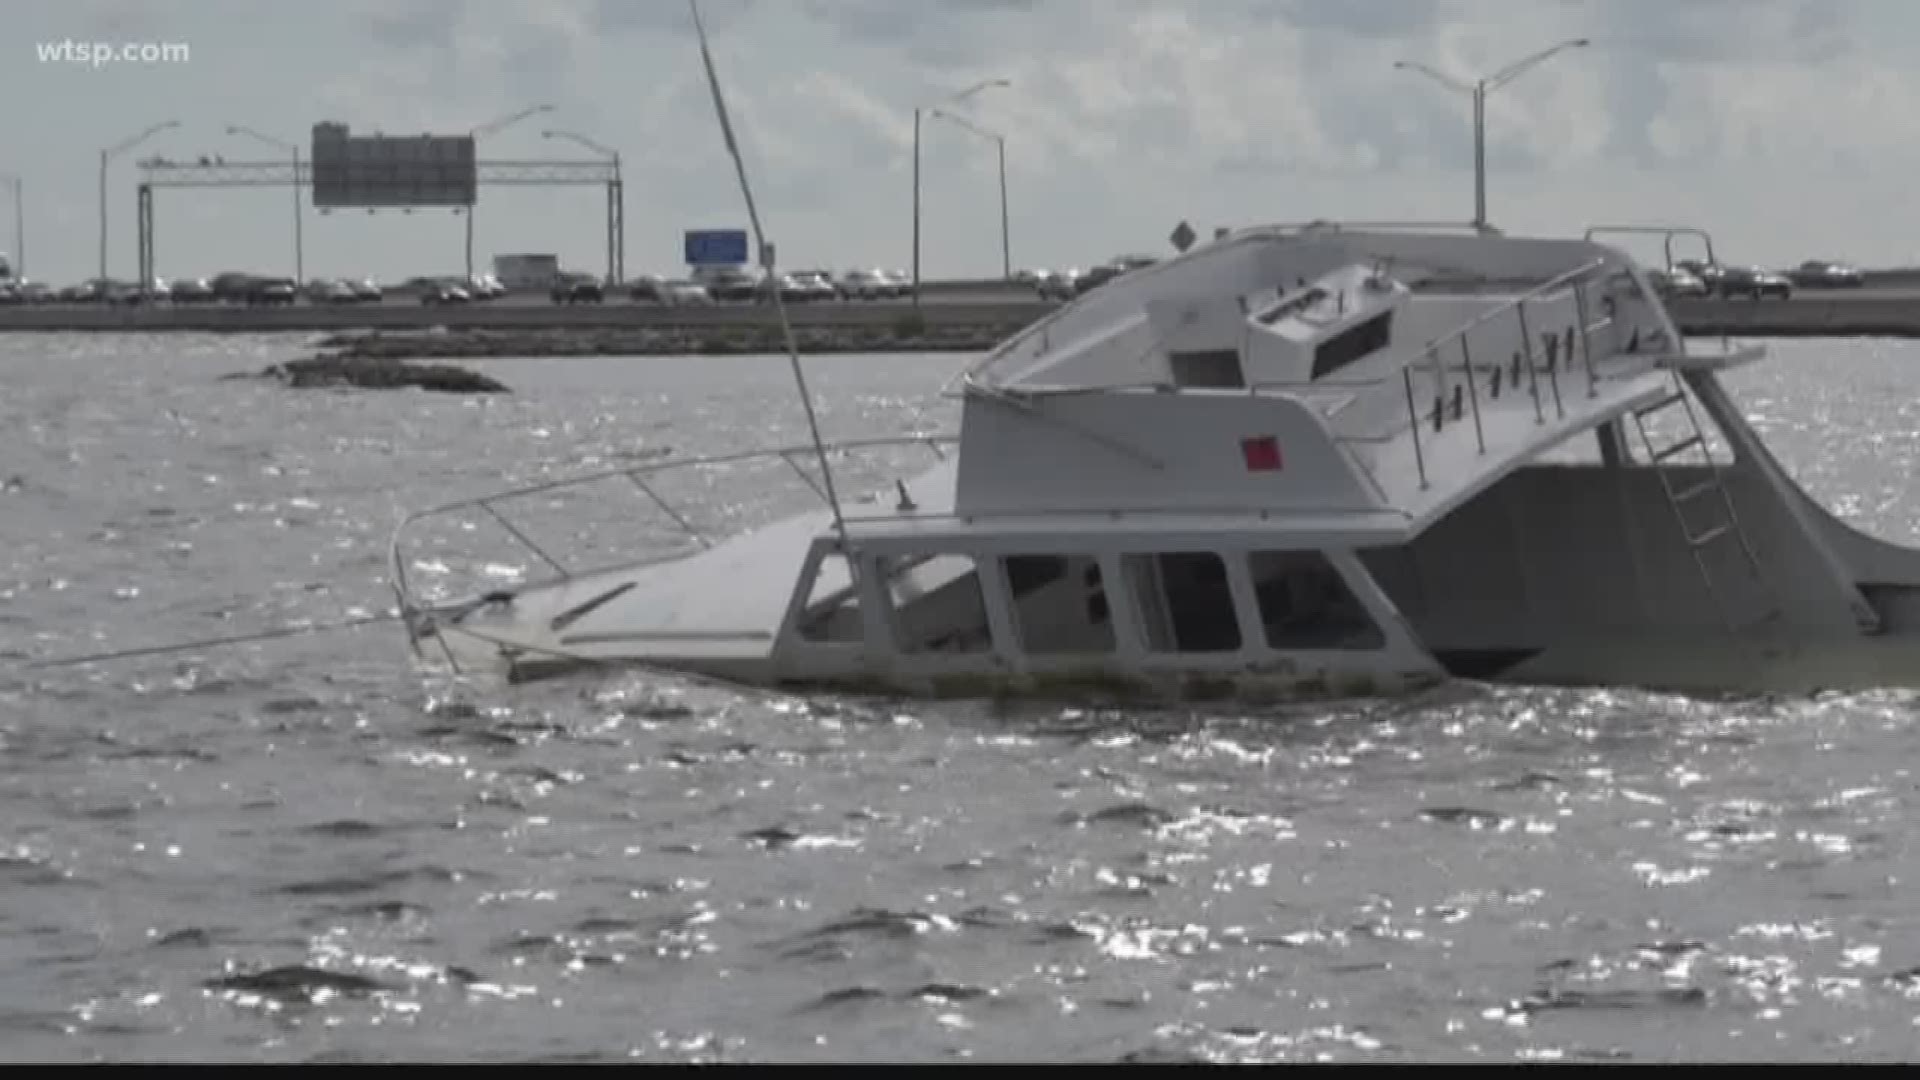 Chances are you’ve seen it during your drive across the Howard Frankland Bridge.

For seven months, a white wooden fishing boat has sat stuck in the shallow waters off the northbound exit of the bridge, baffling drivers and blocking homeowners’ bayfront views.

While neighbors say it’s getting on their nerves, the boat’s owner says it’s all a misunderstanding and now the county is finally making moves to remove it.